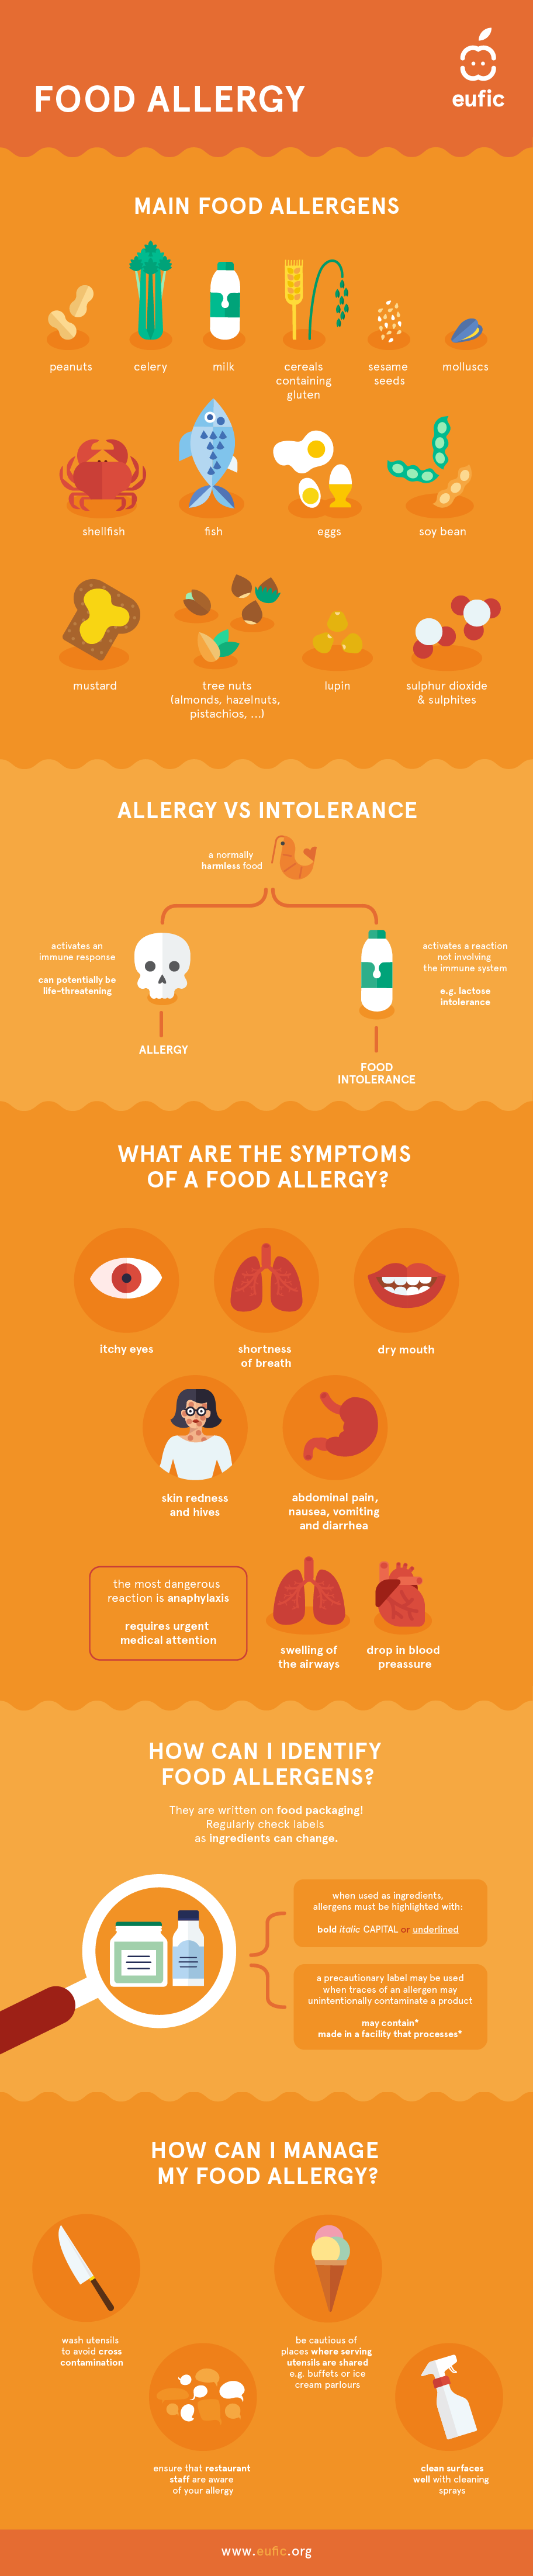 What is a food allergy what are the symptoms and how to manage food allergies 